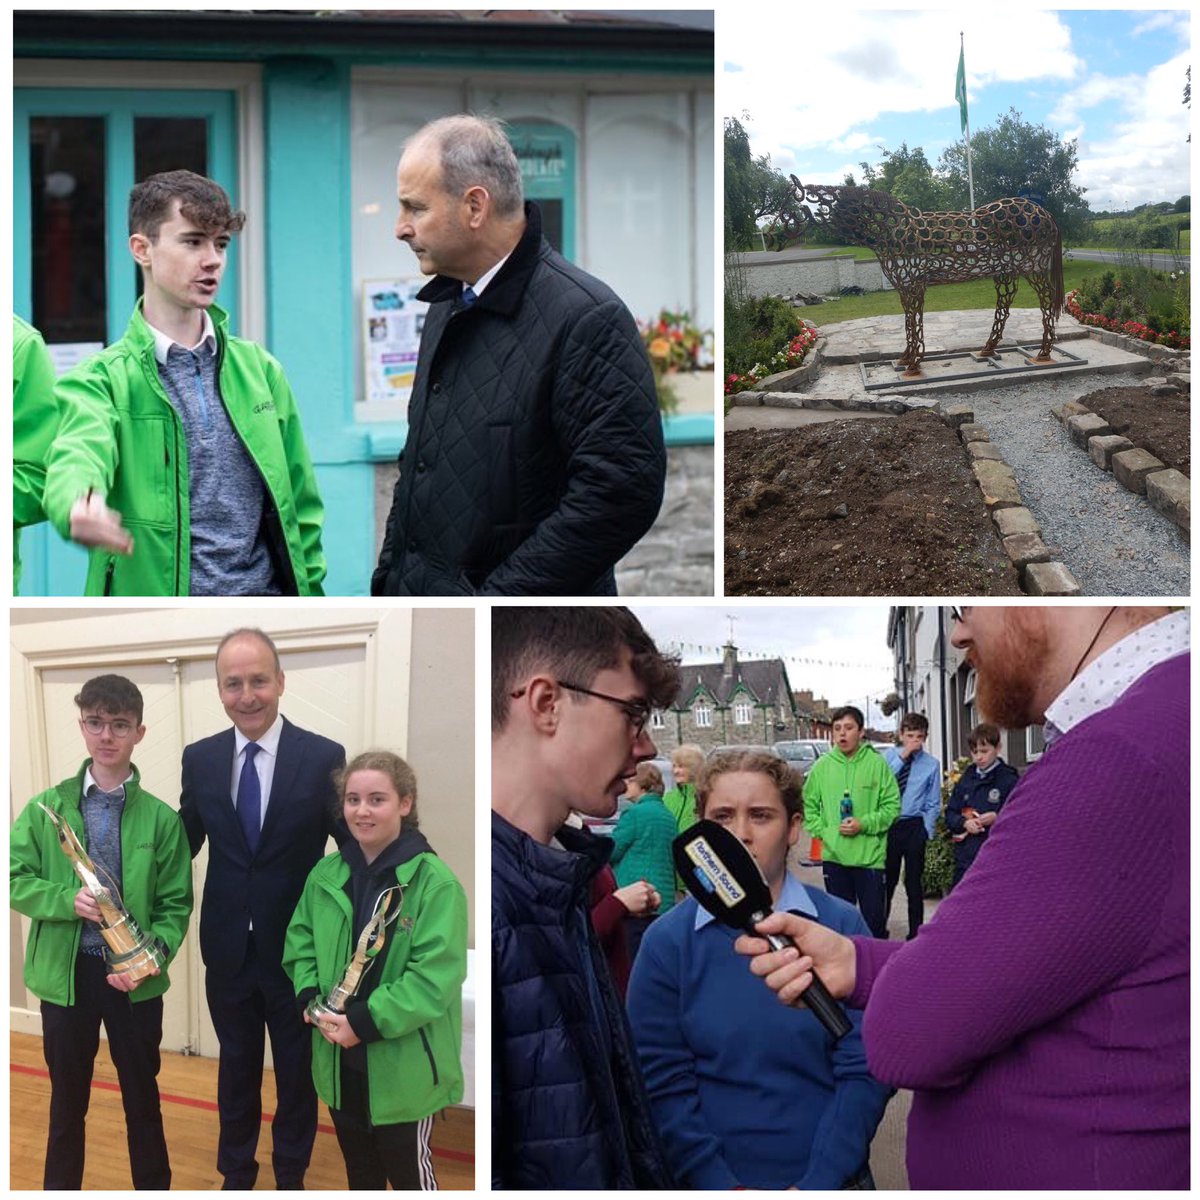 Be a #CommunityActivist & #StudentLeader! Both involved with @GlasloughT and meeting @MichealMartinTD this week to discuss @TidyTownsIre #Monaghan #GreenSchools #FutureLeaders